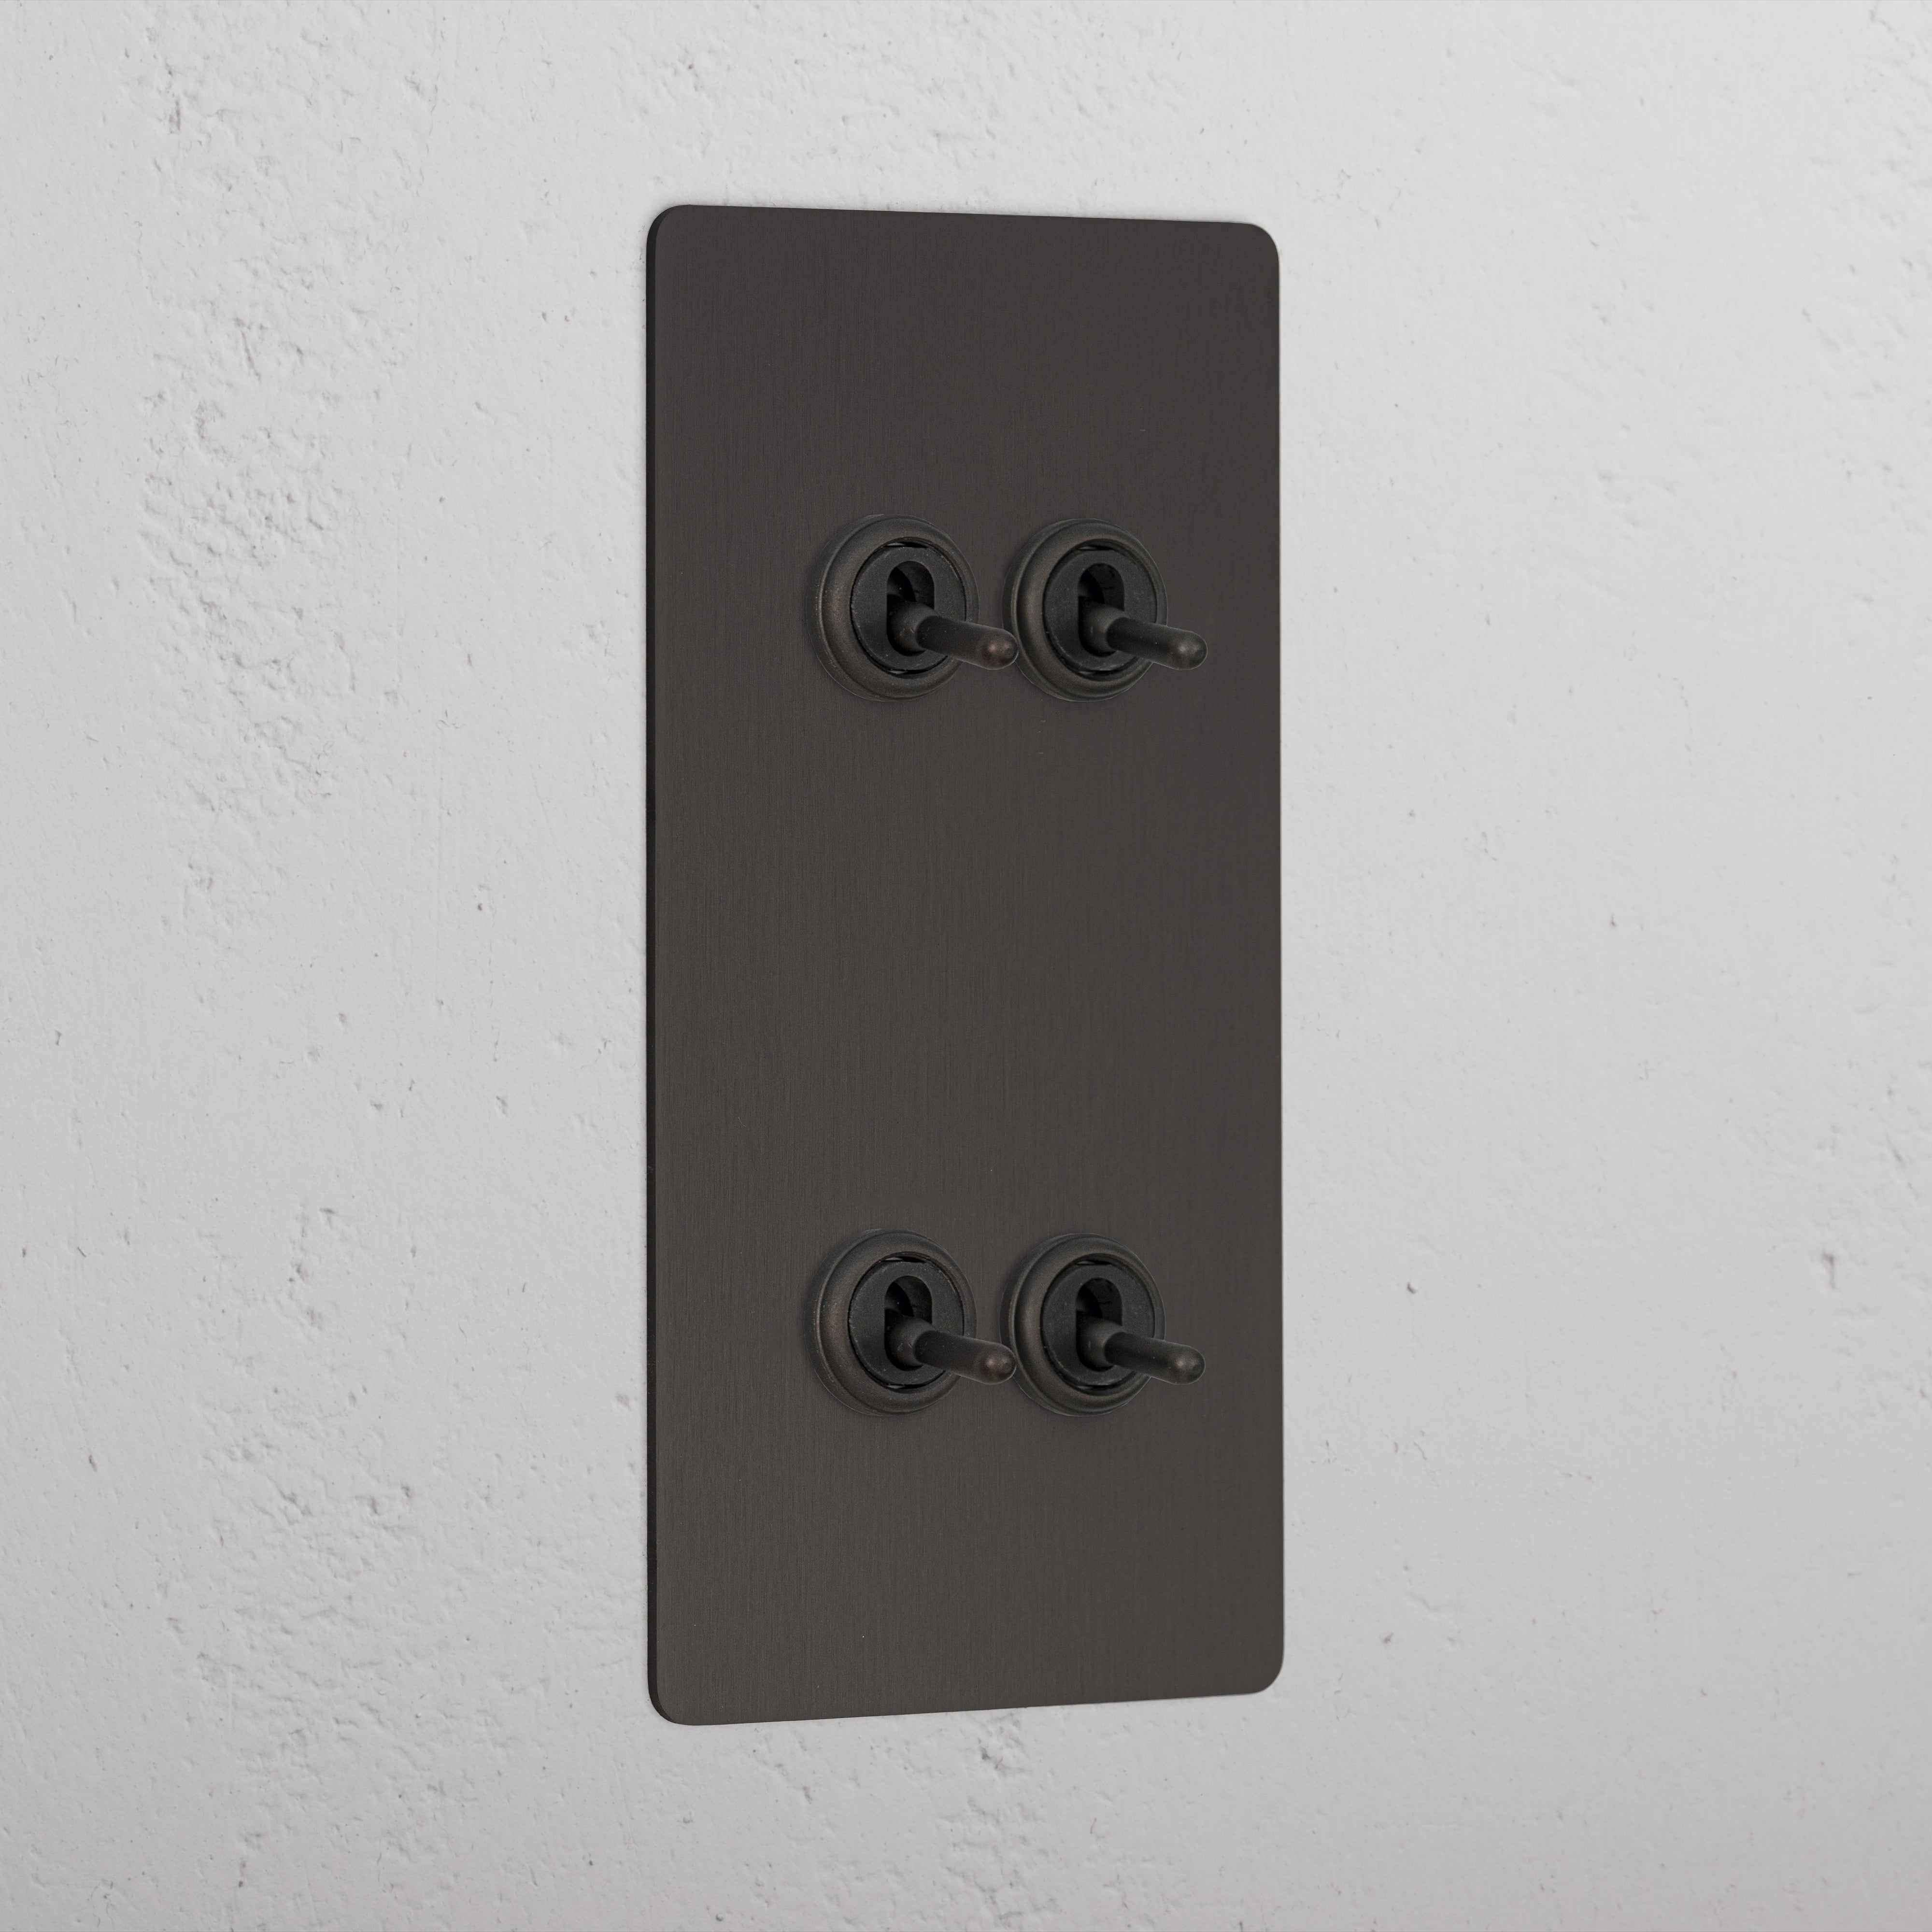 4G Vertical Two Way Toggle Switch - Bronze  